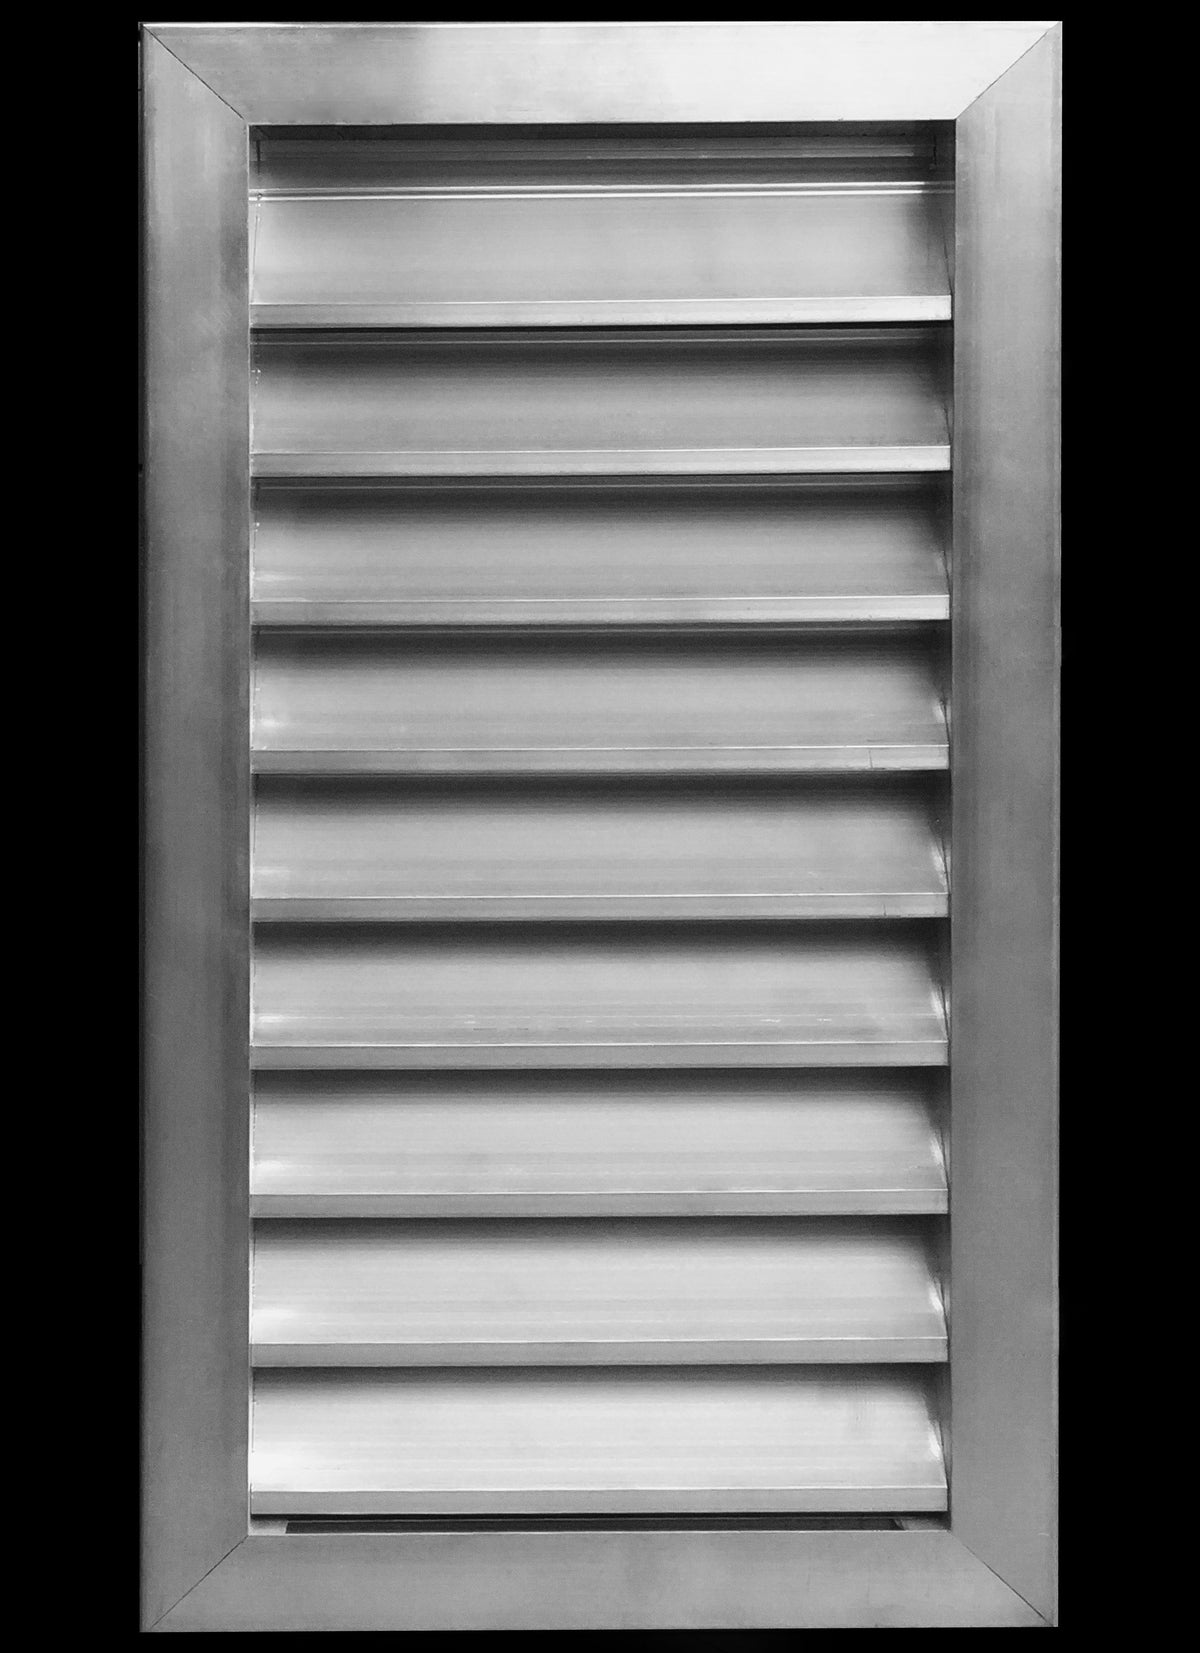 10&quot;w X 20&quot;h Aluminum Outdoor Weather Proof Louvers - Rain &amp; Waterproof Air Vent With Screen Mesh